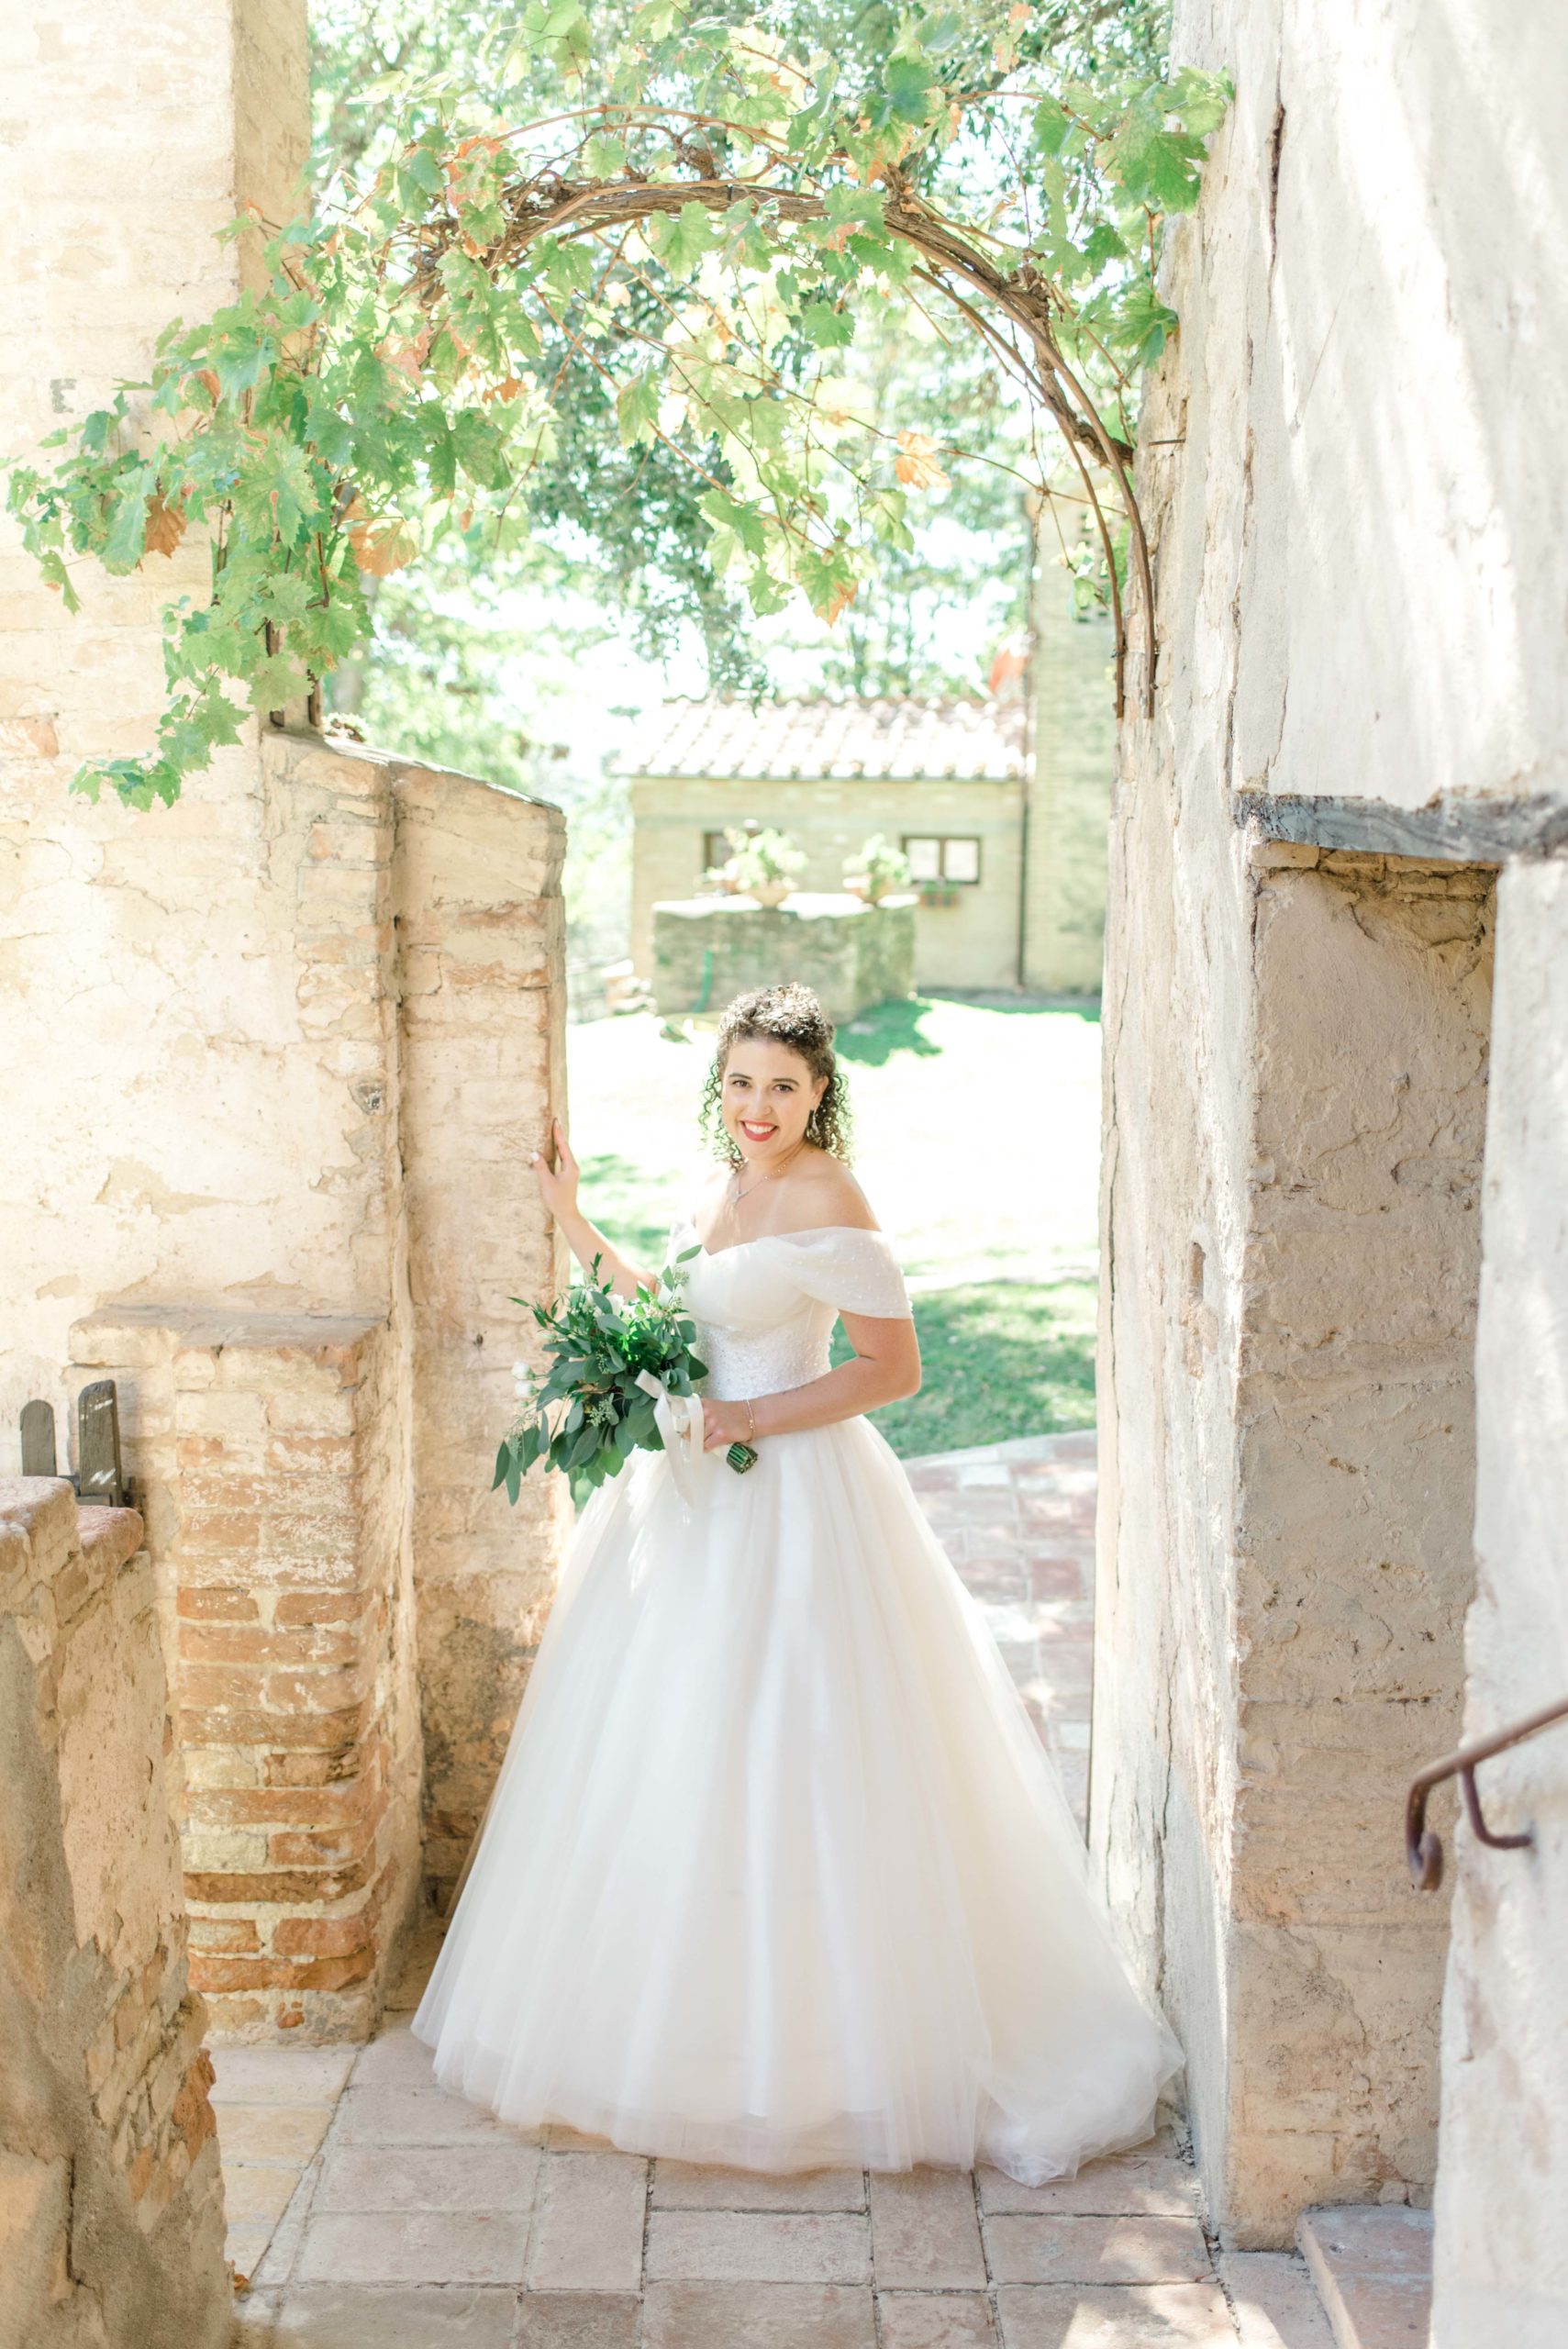 Bridal portrait poses during a destination wedding in Florence Italy.